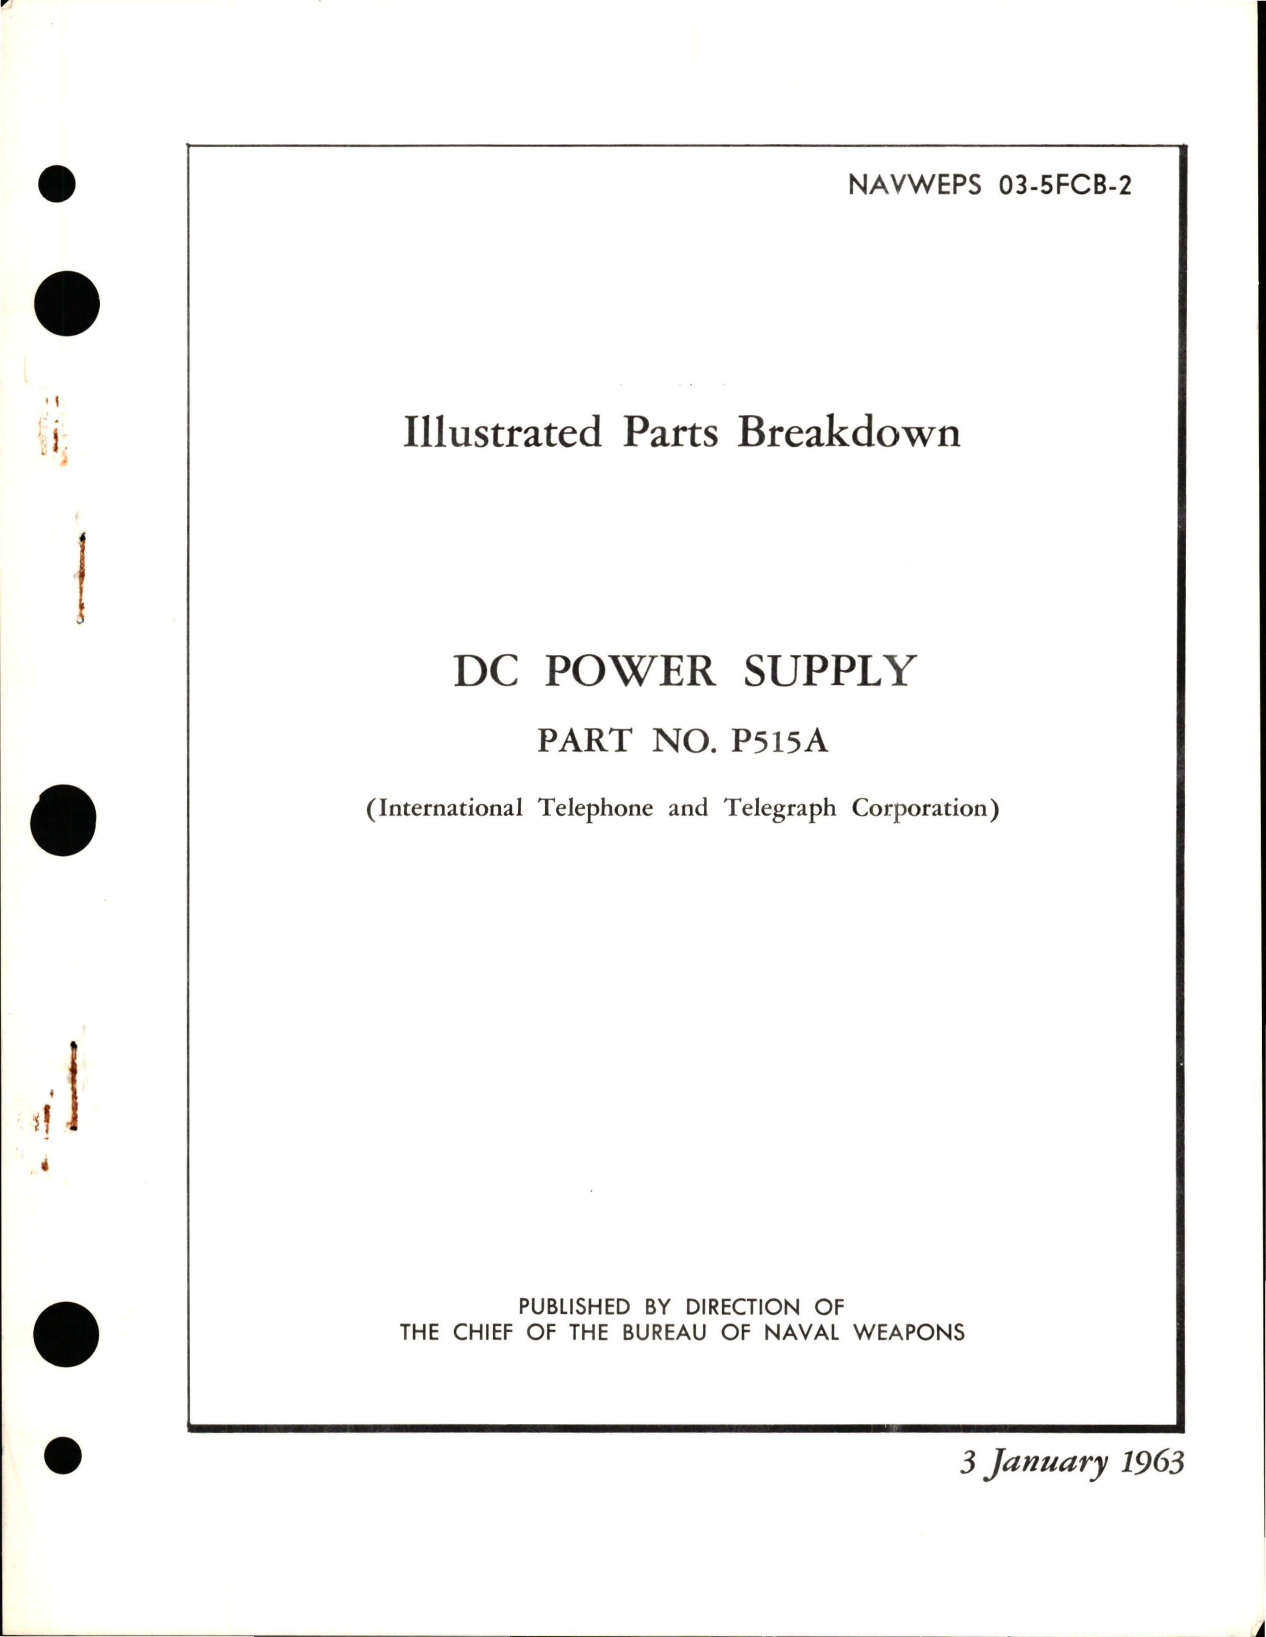 Sample page 1 from AirCorps Library document: Illustrated Parts Breakdown for DC Power Supply - Part P515A